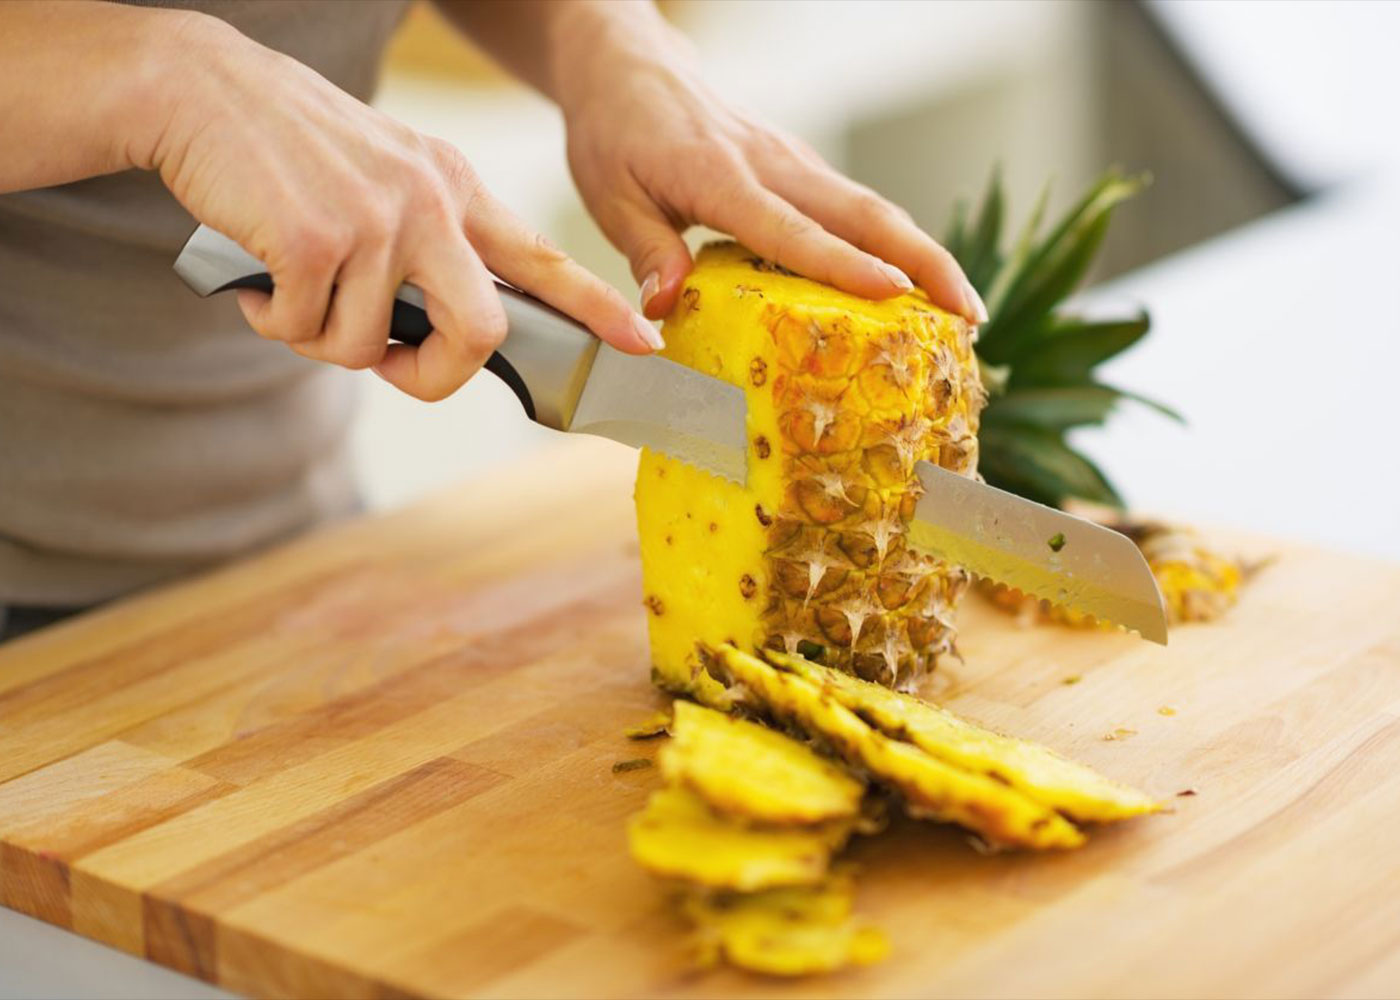 Benefits of Eating Pineapple for a Woman